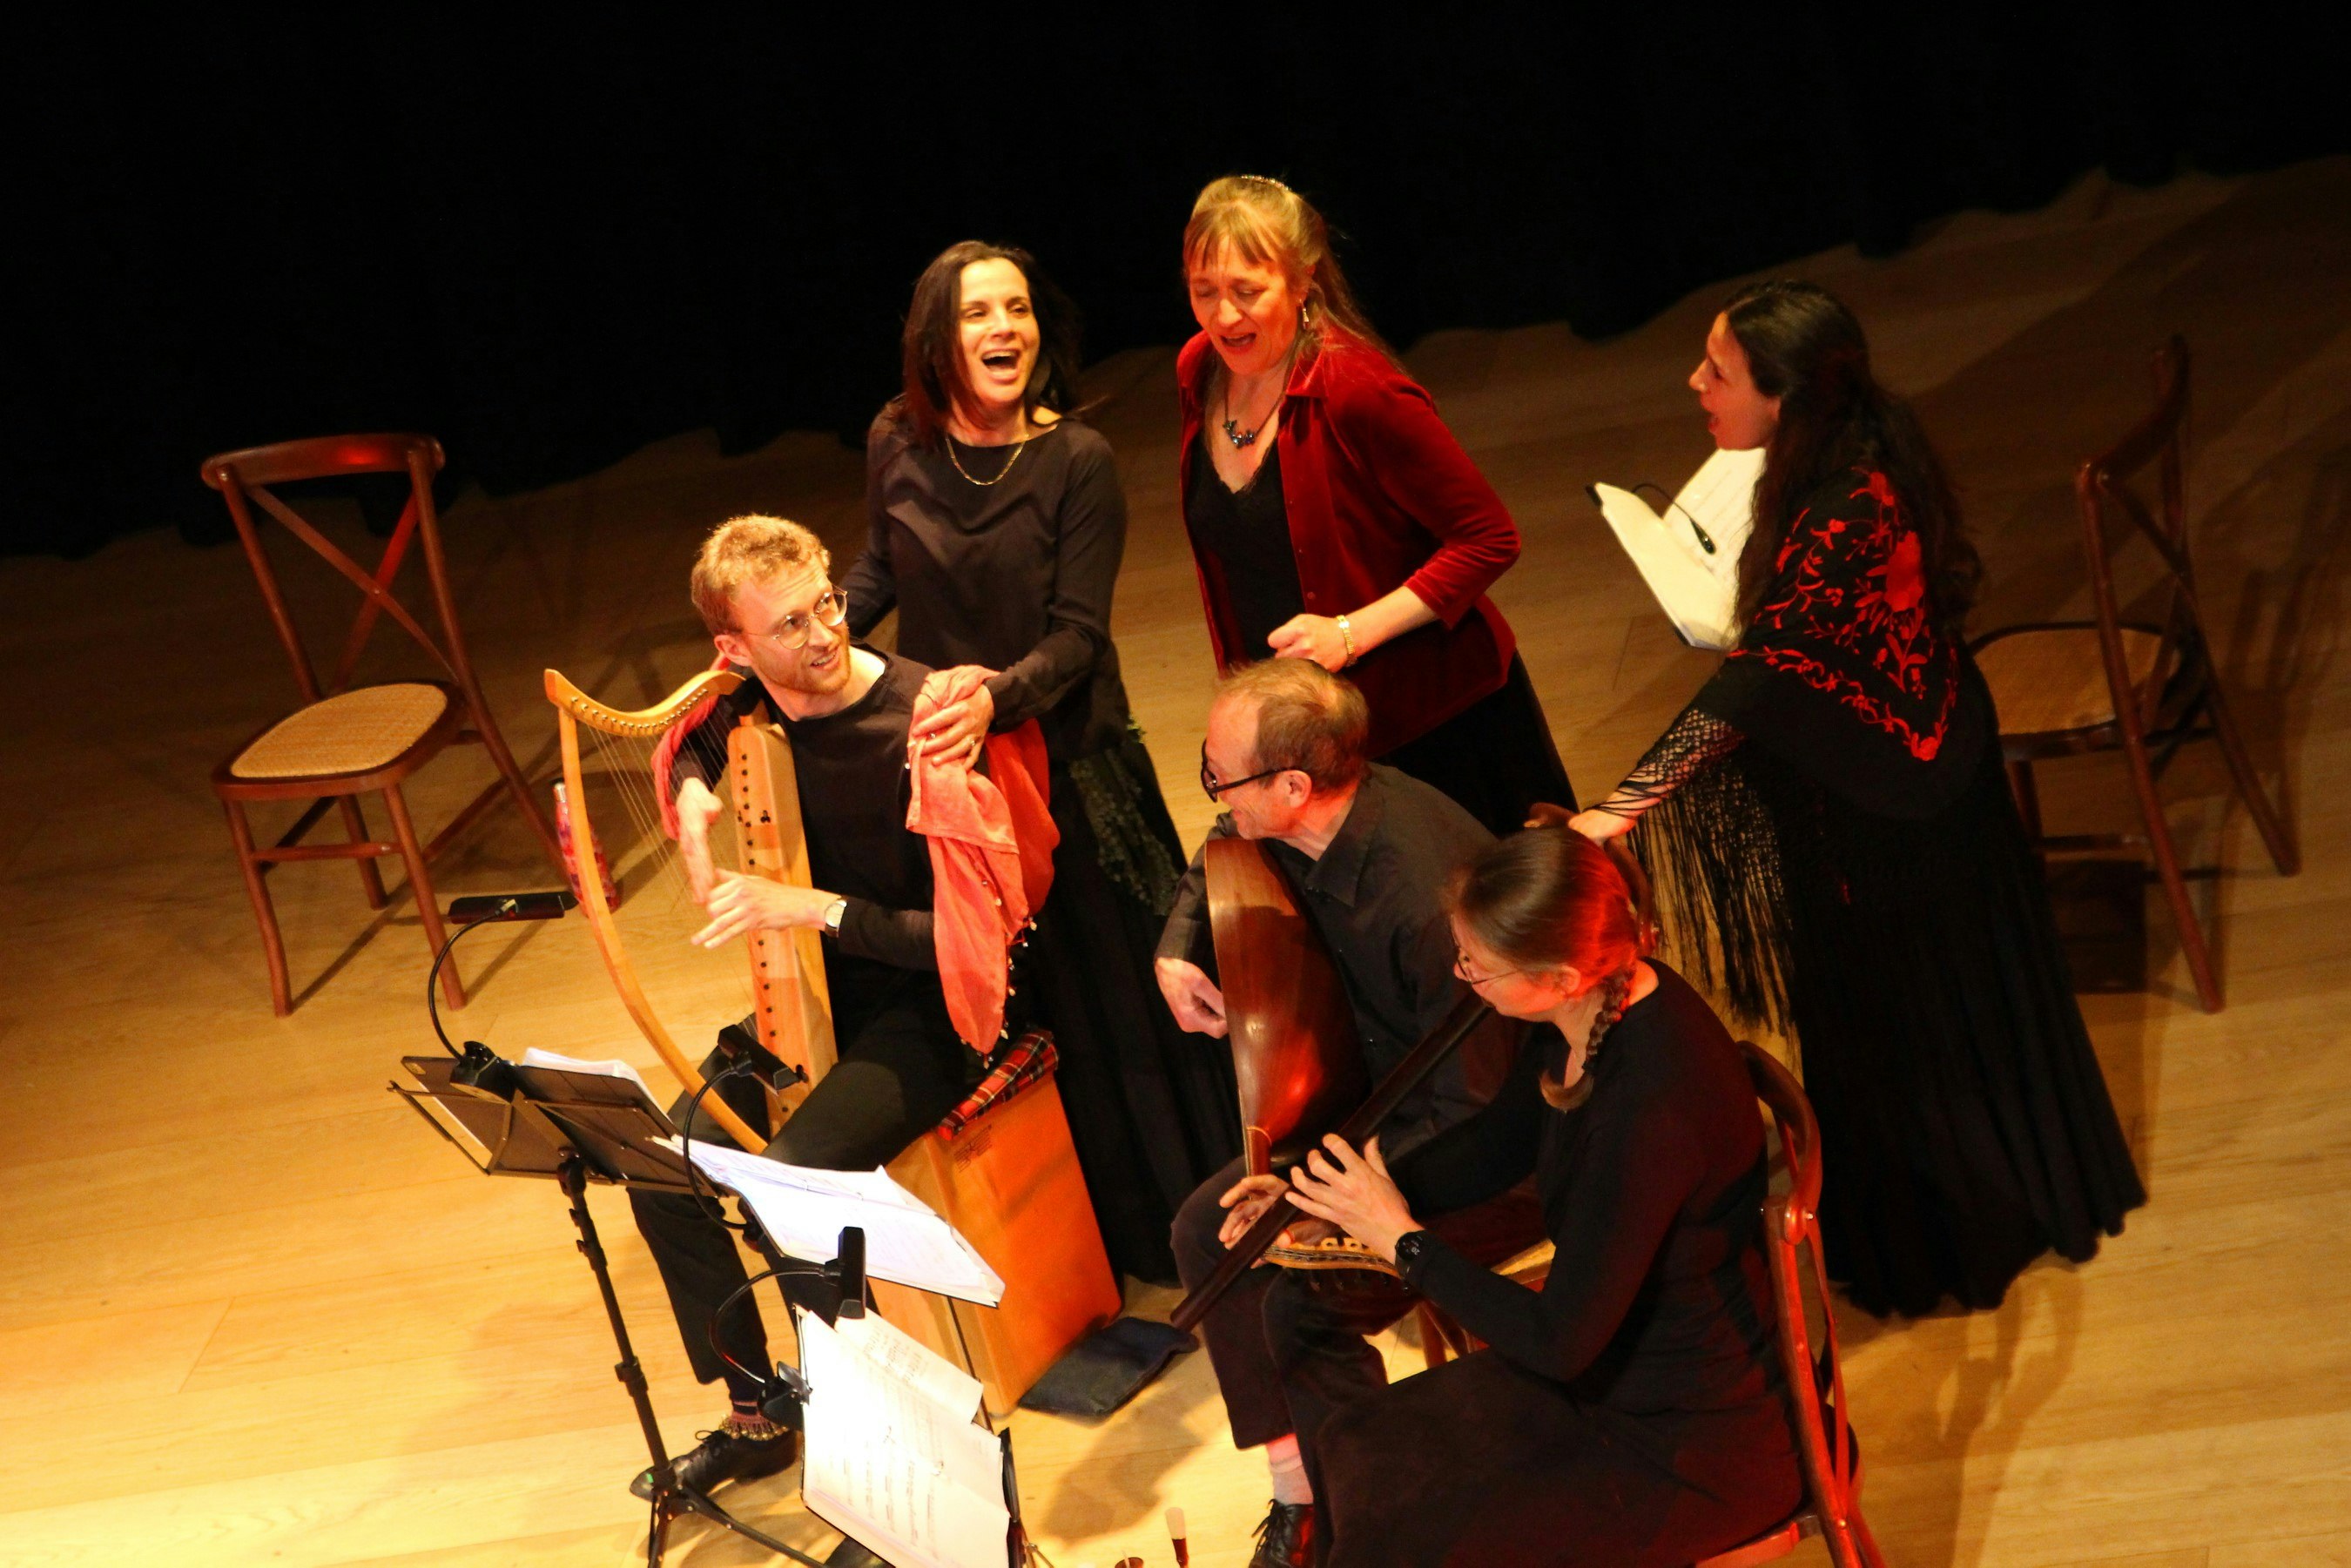 A birds eye view of a stage. On the stage four women and two men are interacting. They are all very animated and two of the people are sat down playing muscial instruments